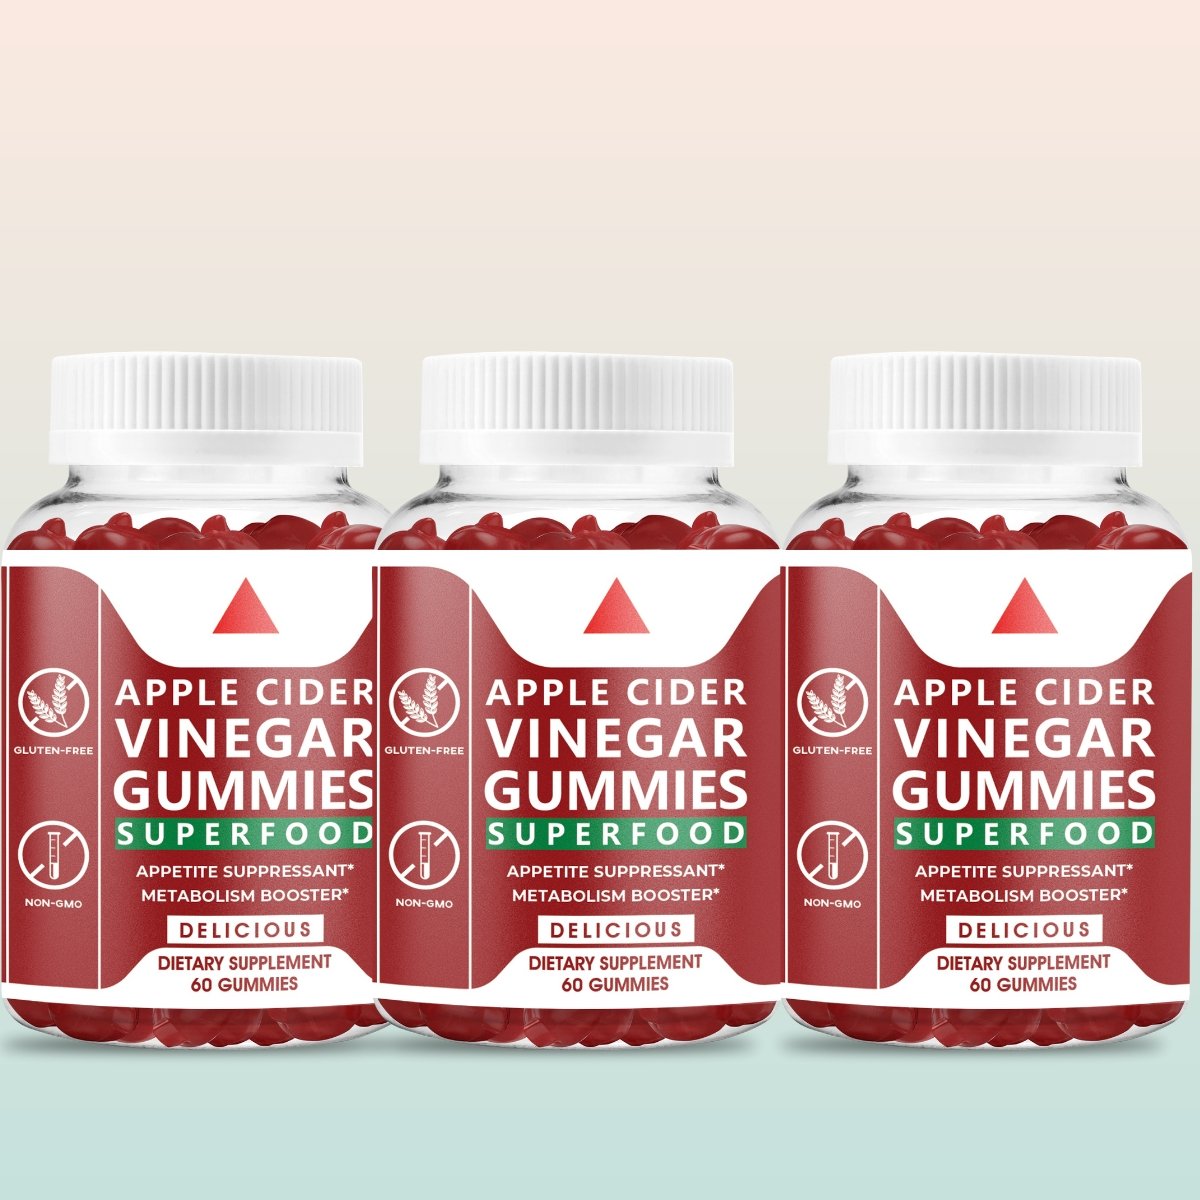 Apple Cider Vinegar Superfood Gummies - Supports Immune, Energy, Digestion, and Skin | 3-Pack - Herblif Nutrition USA